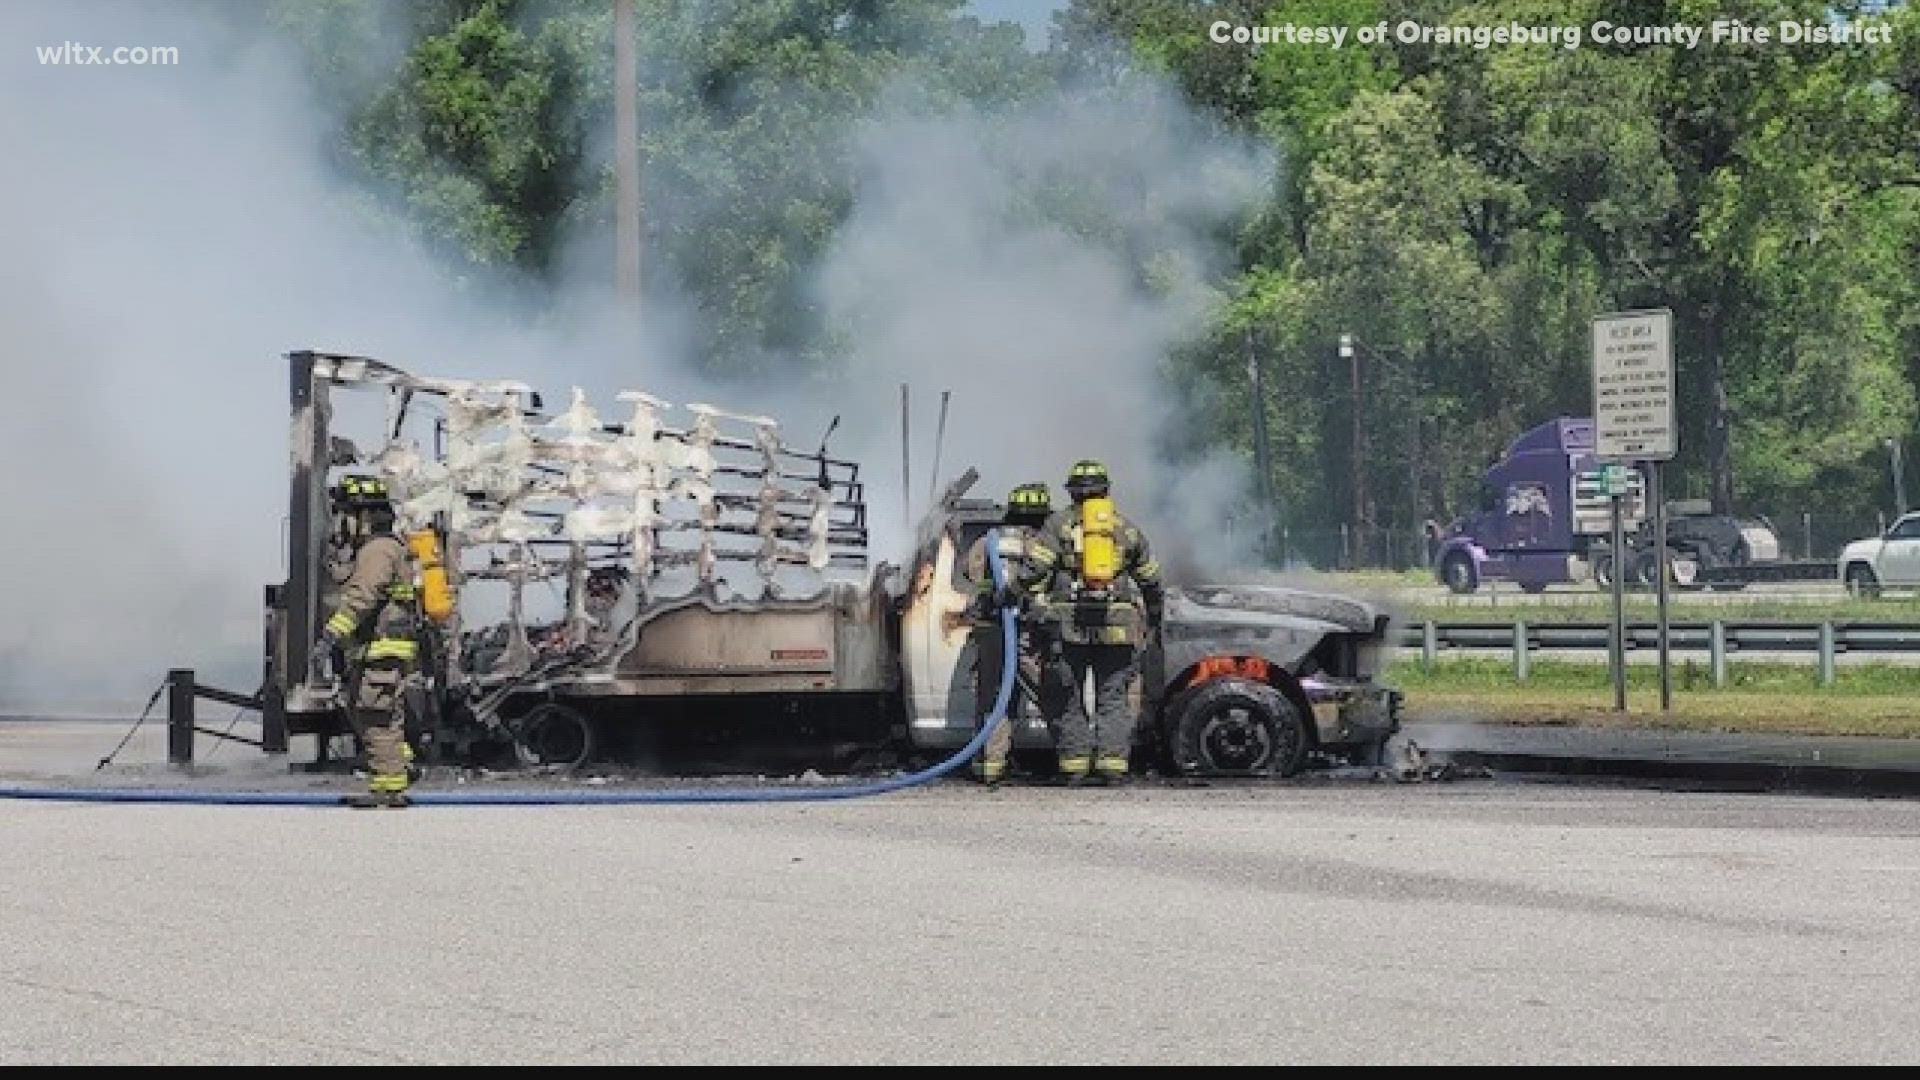 The fire was in Orangeburg county near the I-26 eastbound rest area Monday afternoon.